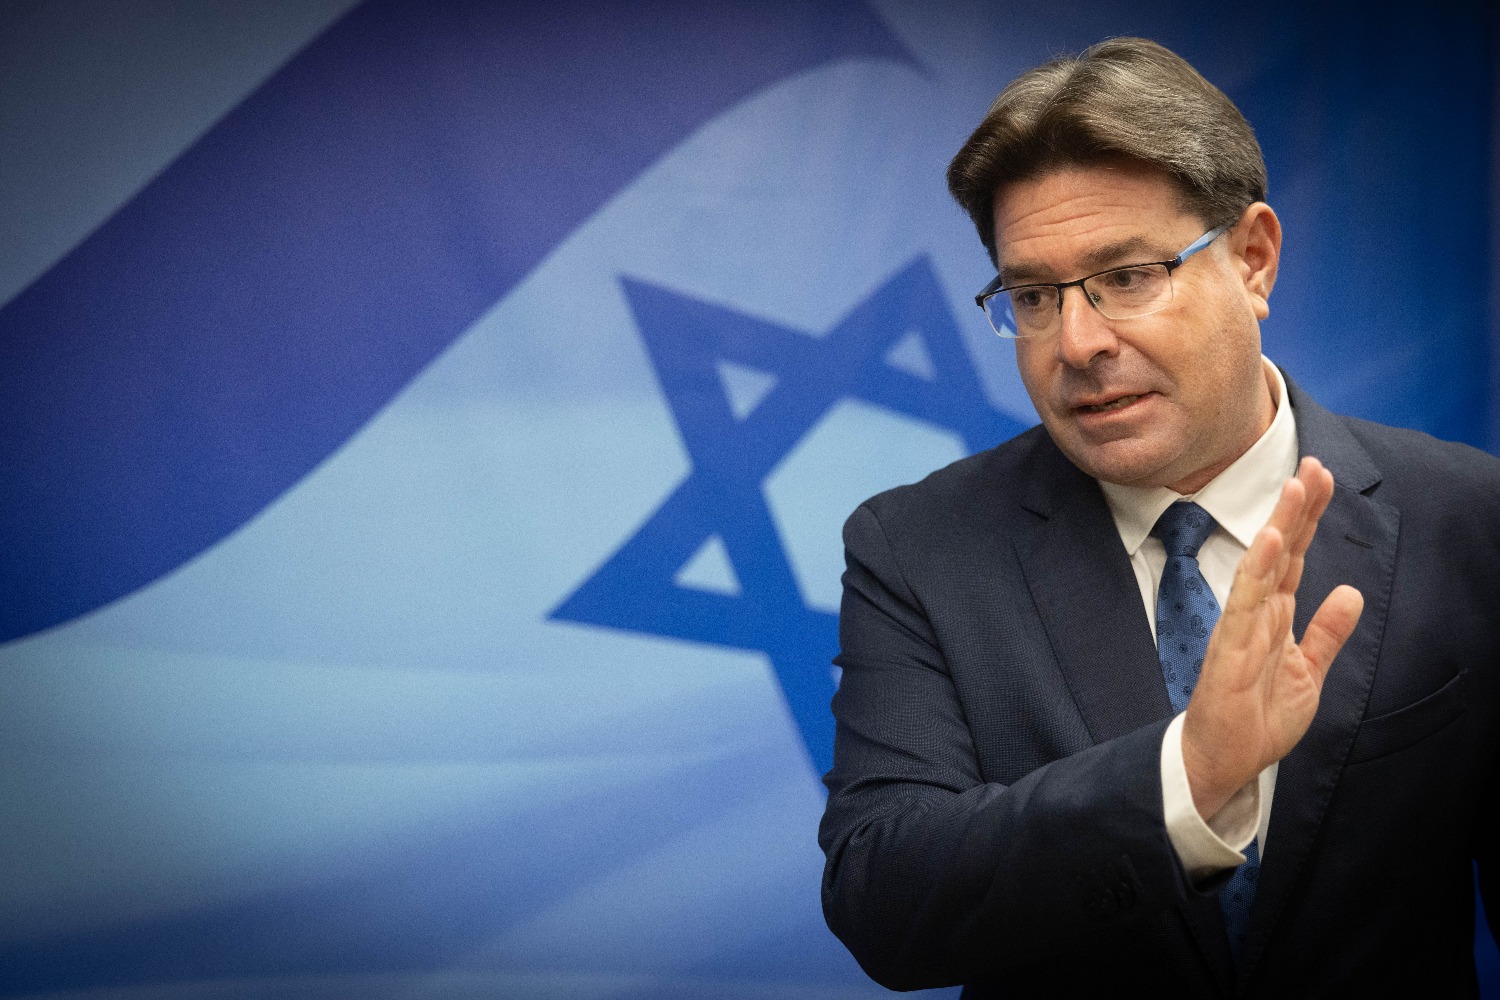 Ofir Akunis is sent as consul to New York